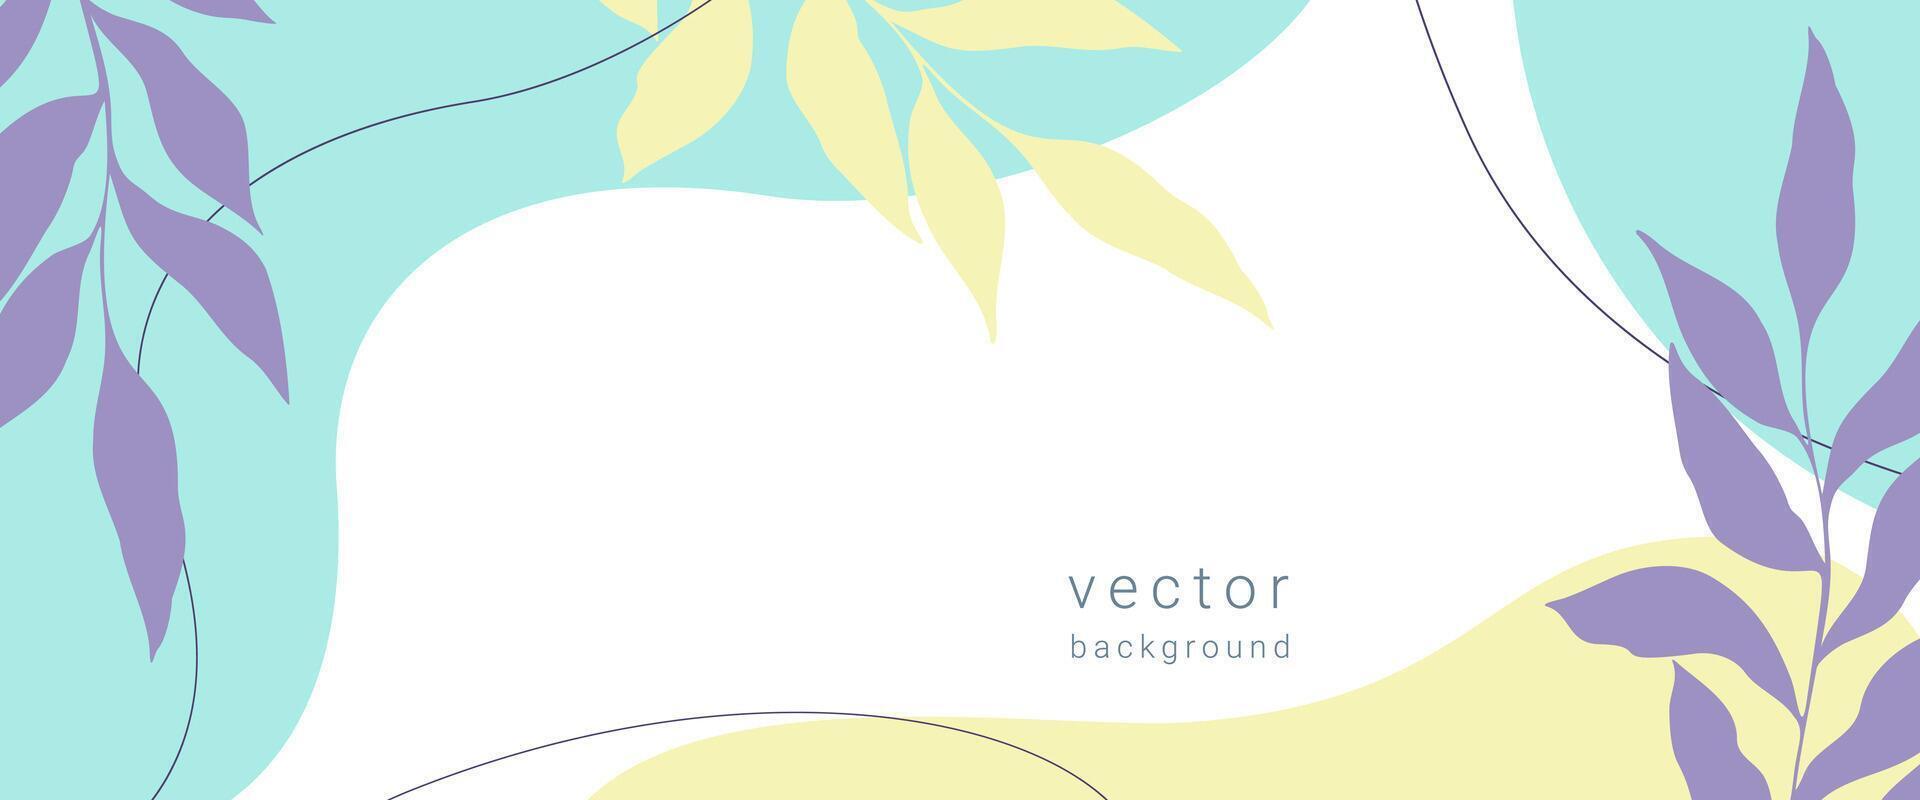 Botanical background banner horizontal with colorful leaves and curved shapes in boho style, purple and yellow flowers. vector